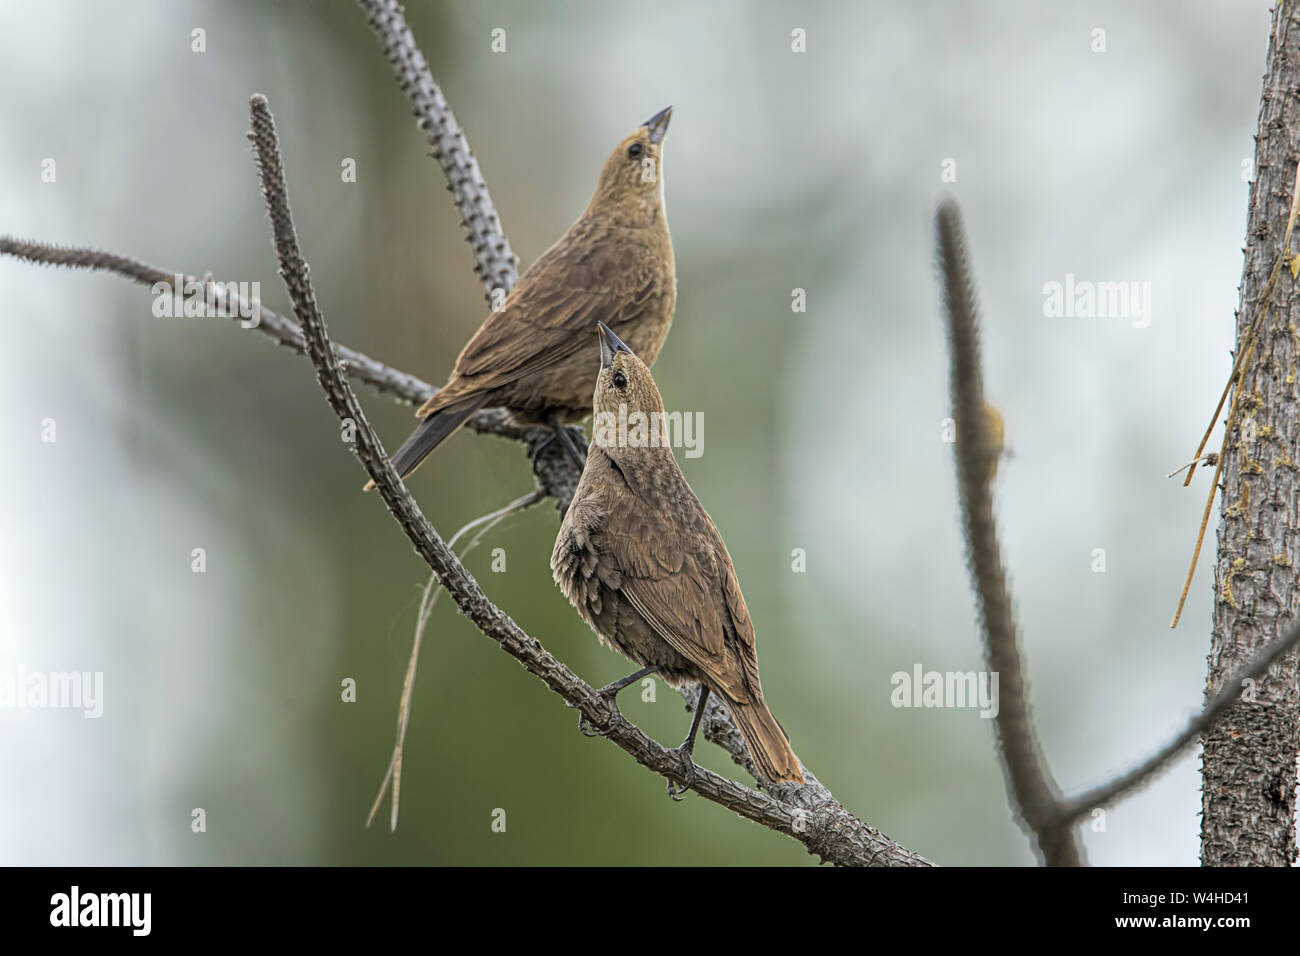 Common sparrows on a branch at Turnbull wildlife refuge in Cheney, Washington. Stock Photo